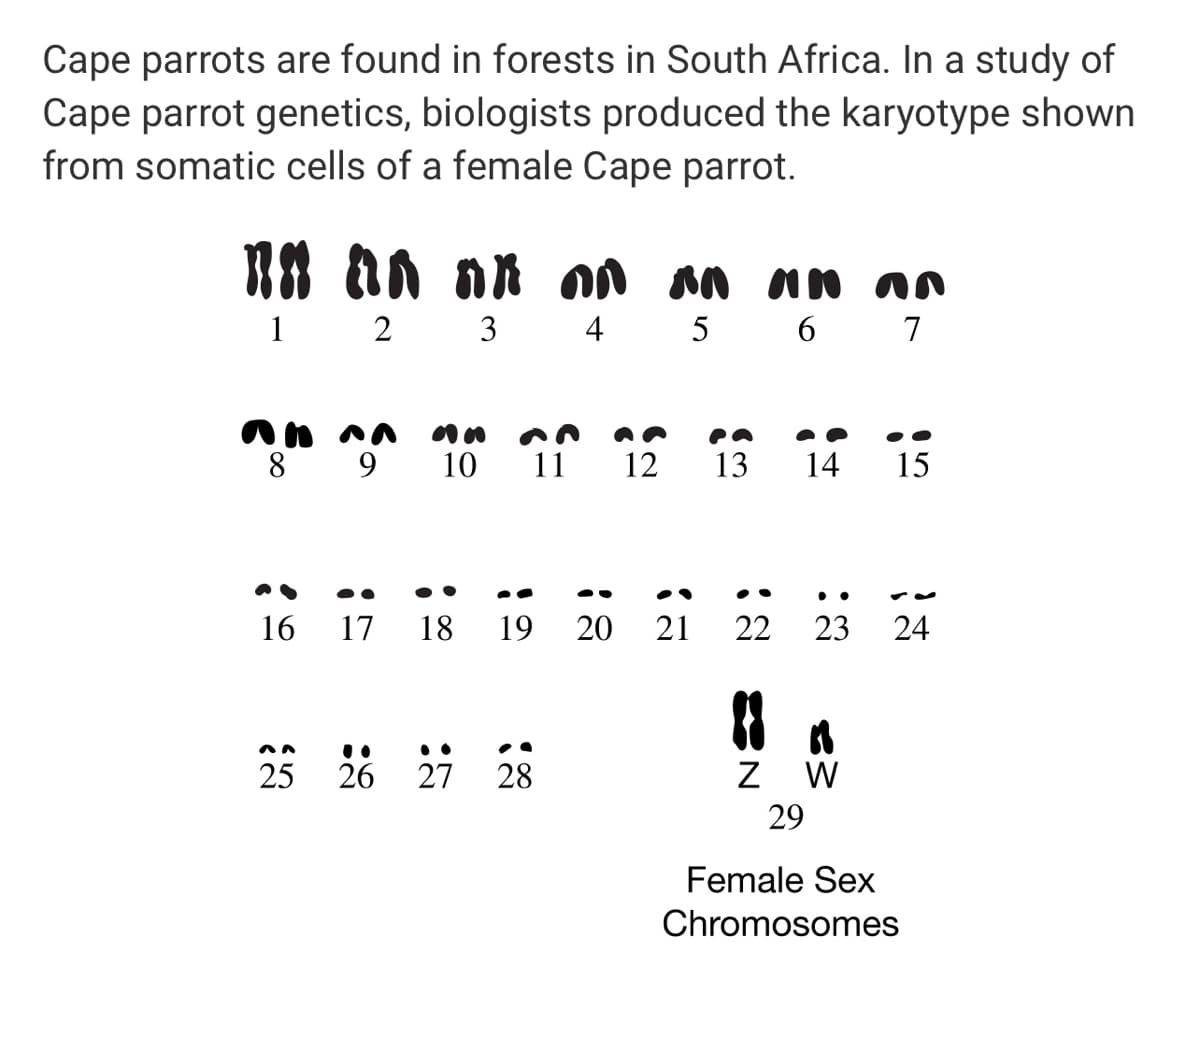 Cape parrots are found in forests in South Africa. In a study of
Cape parrot genetics, biologists produced the karyotype shown
from somatic cells of a female Cape parrot.
an nk on an nN n
1
2 3
4 5 6
7
an nn
8 9
10
12
13
14
15
• .
16
17
18
19
20
21
22
23
24
25 26 27 28
Z W
29
Female Sex
Chromosomes
